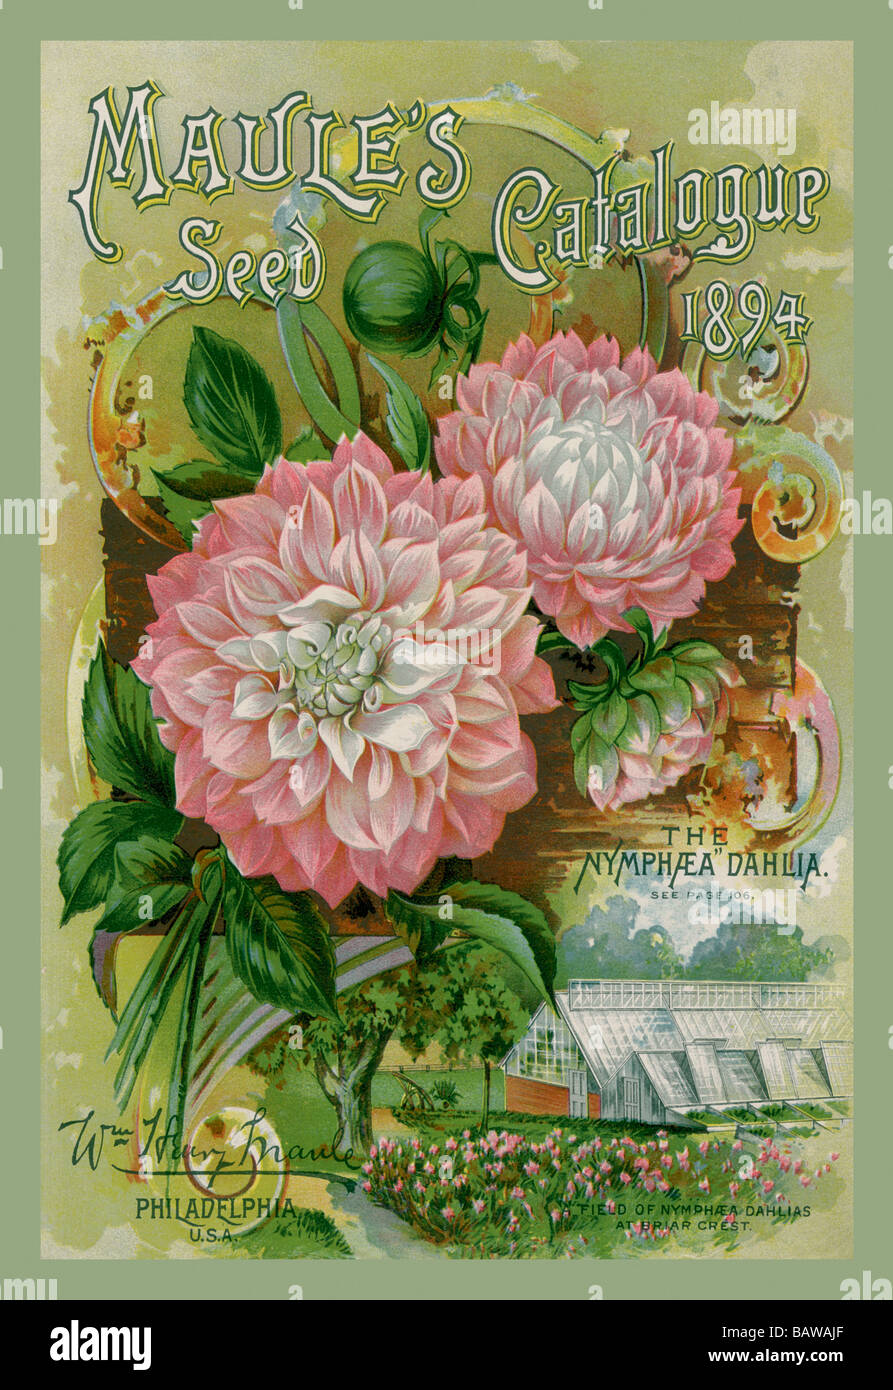 1899 Dreer's Garden Vintage Flowers Seed Packet Catalogue Advertisement Poster 